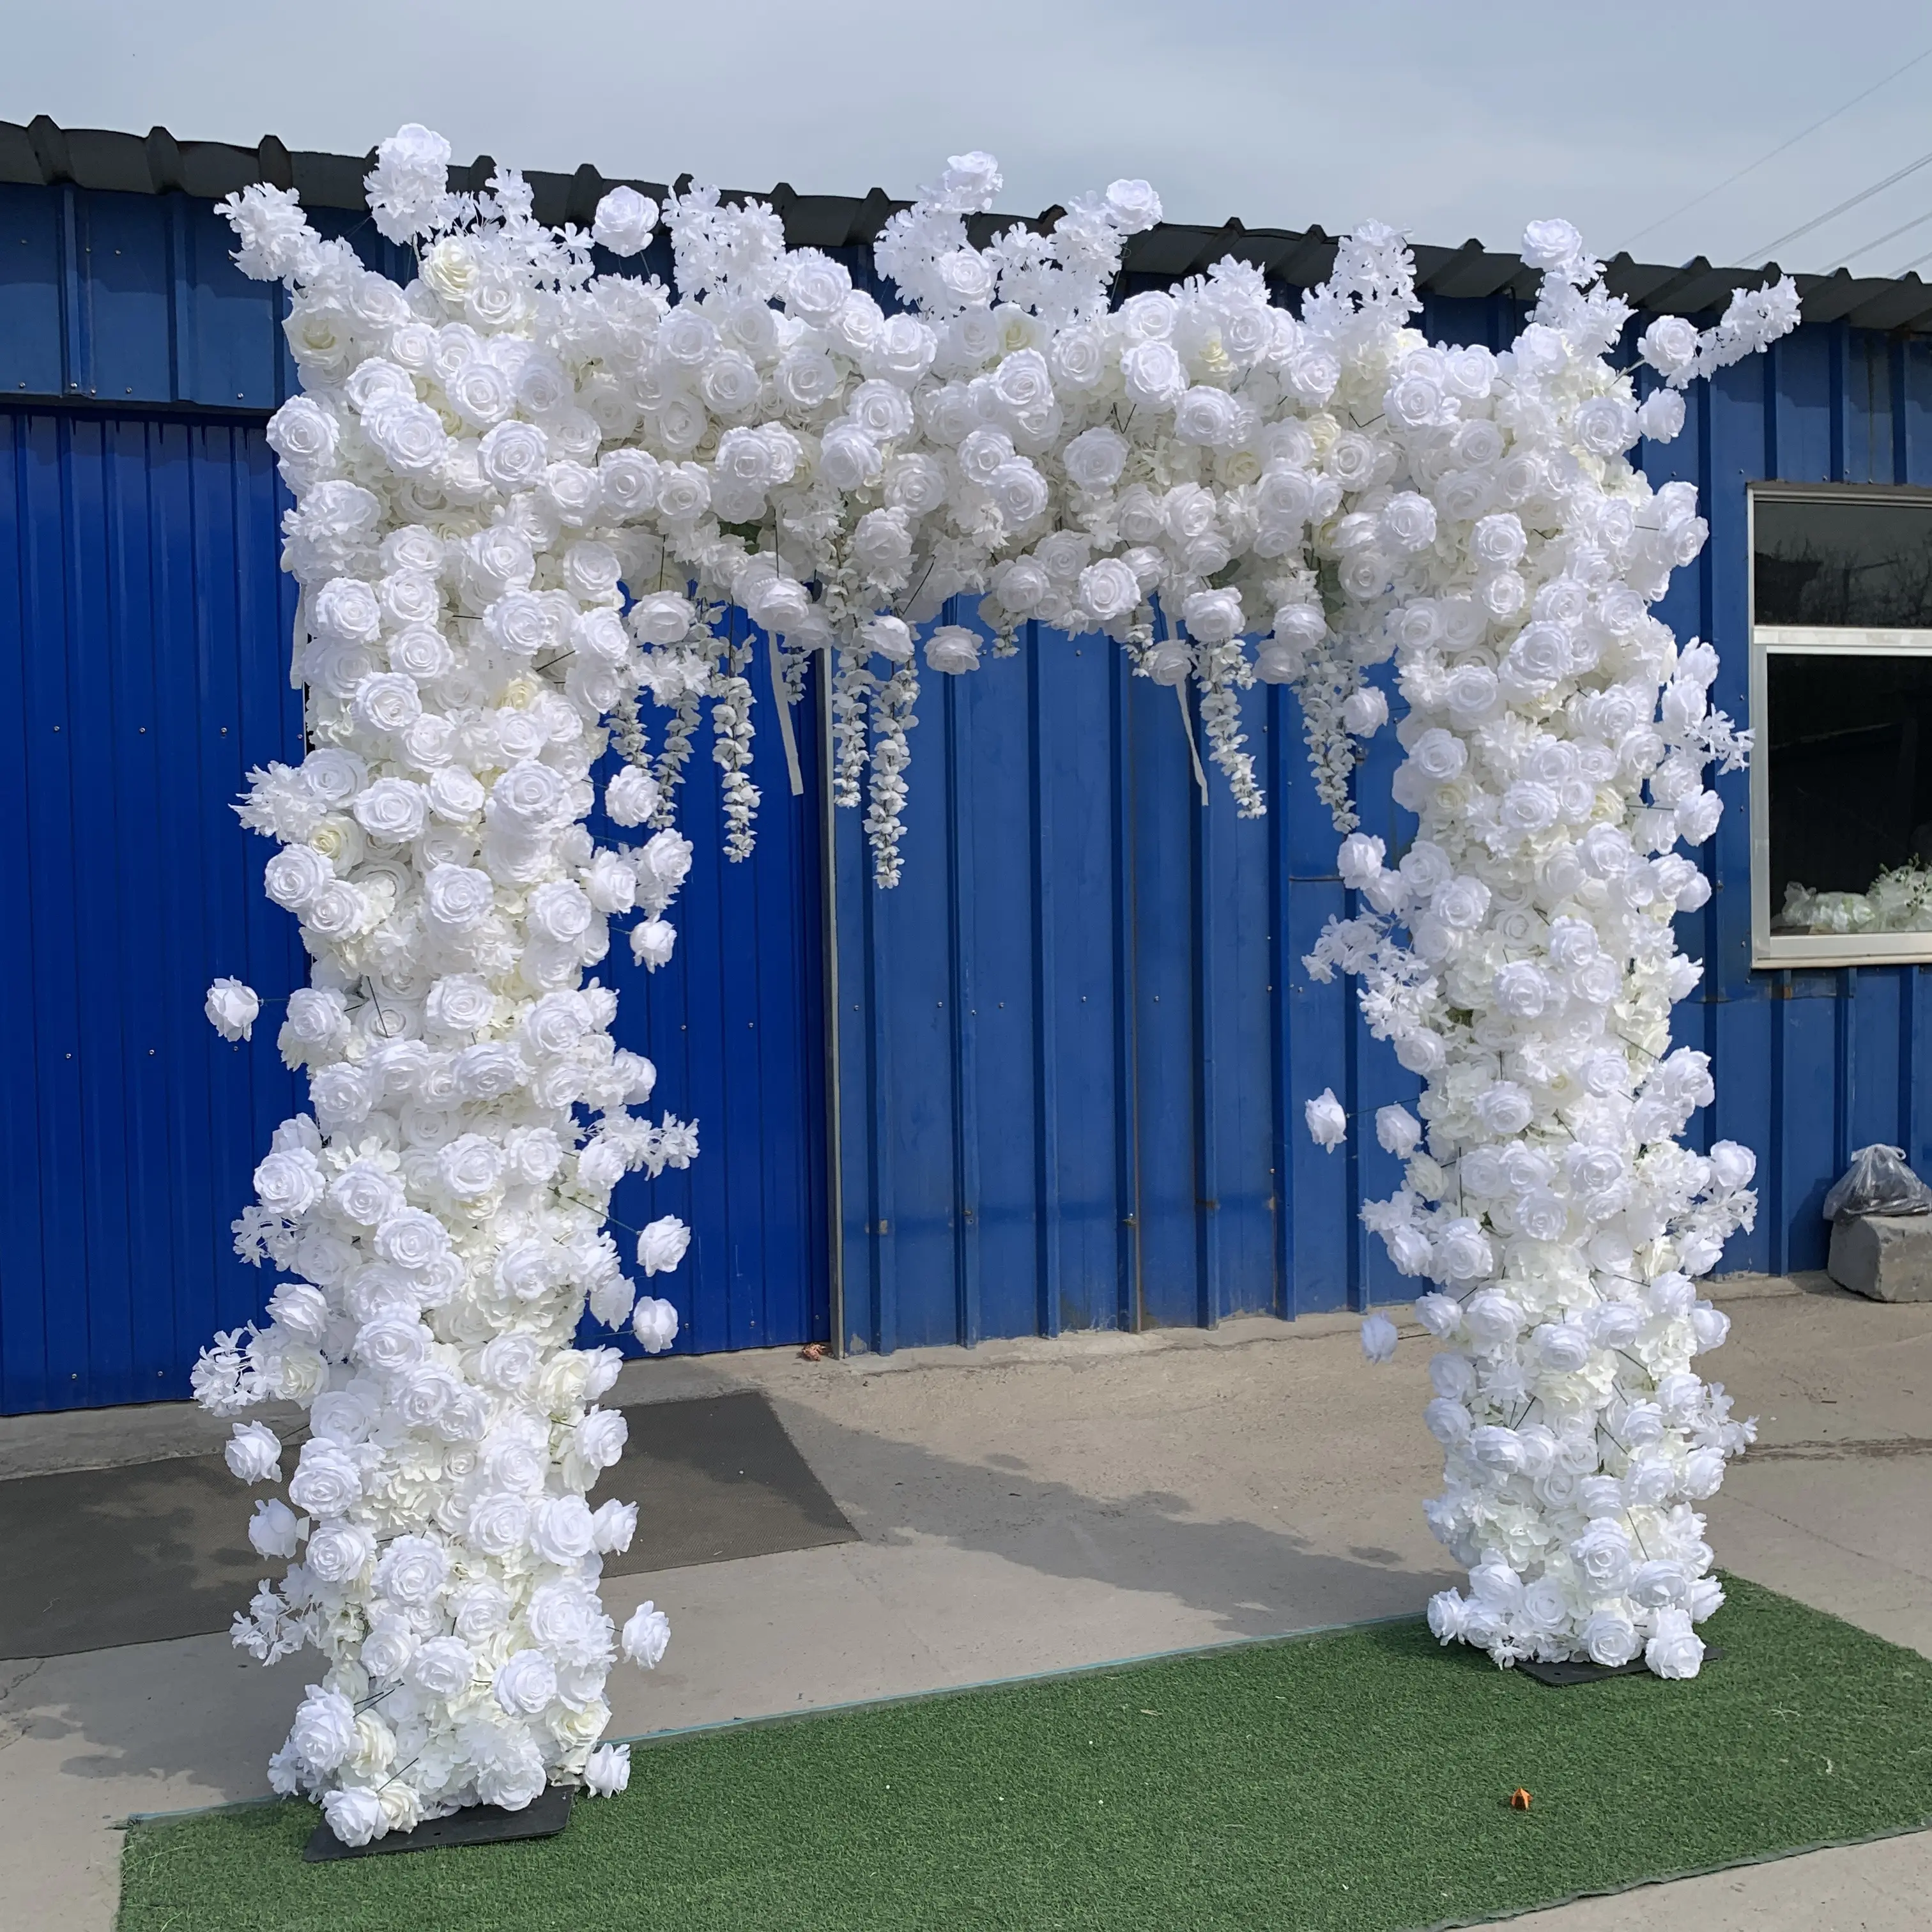 A-FSA012 Hot sales square flower arch for wedding arch backdrop with flowers artificial silk flowers arch arrangement